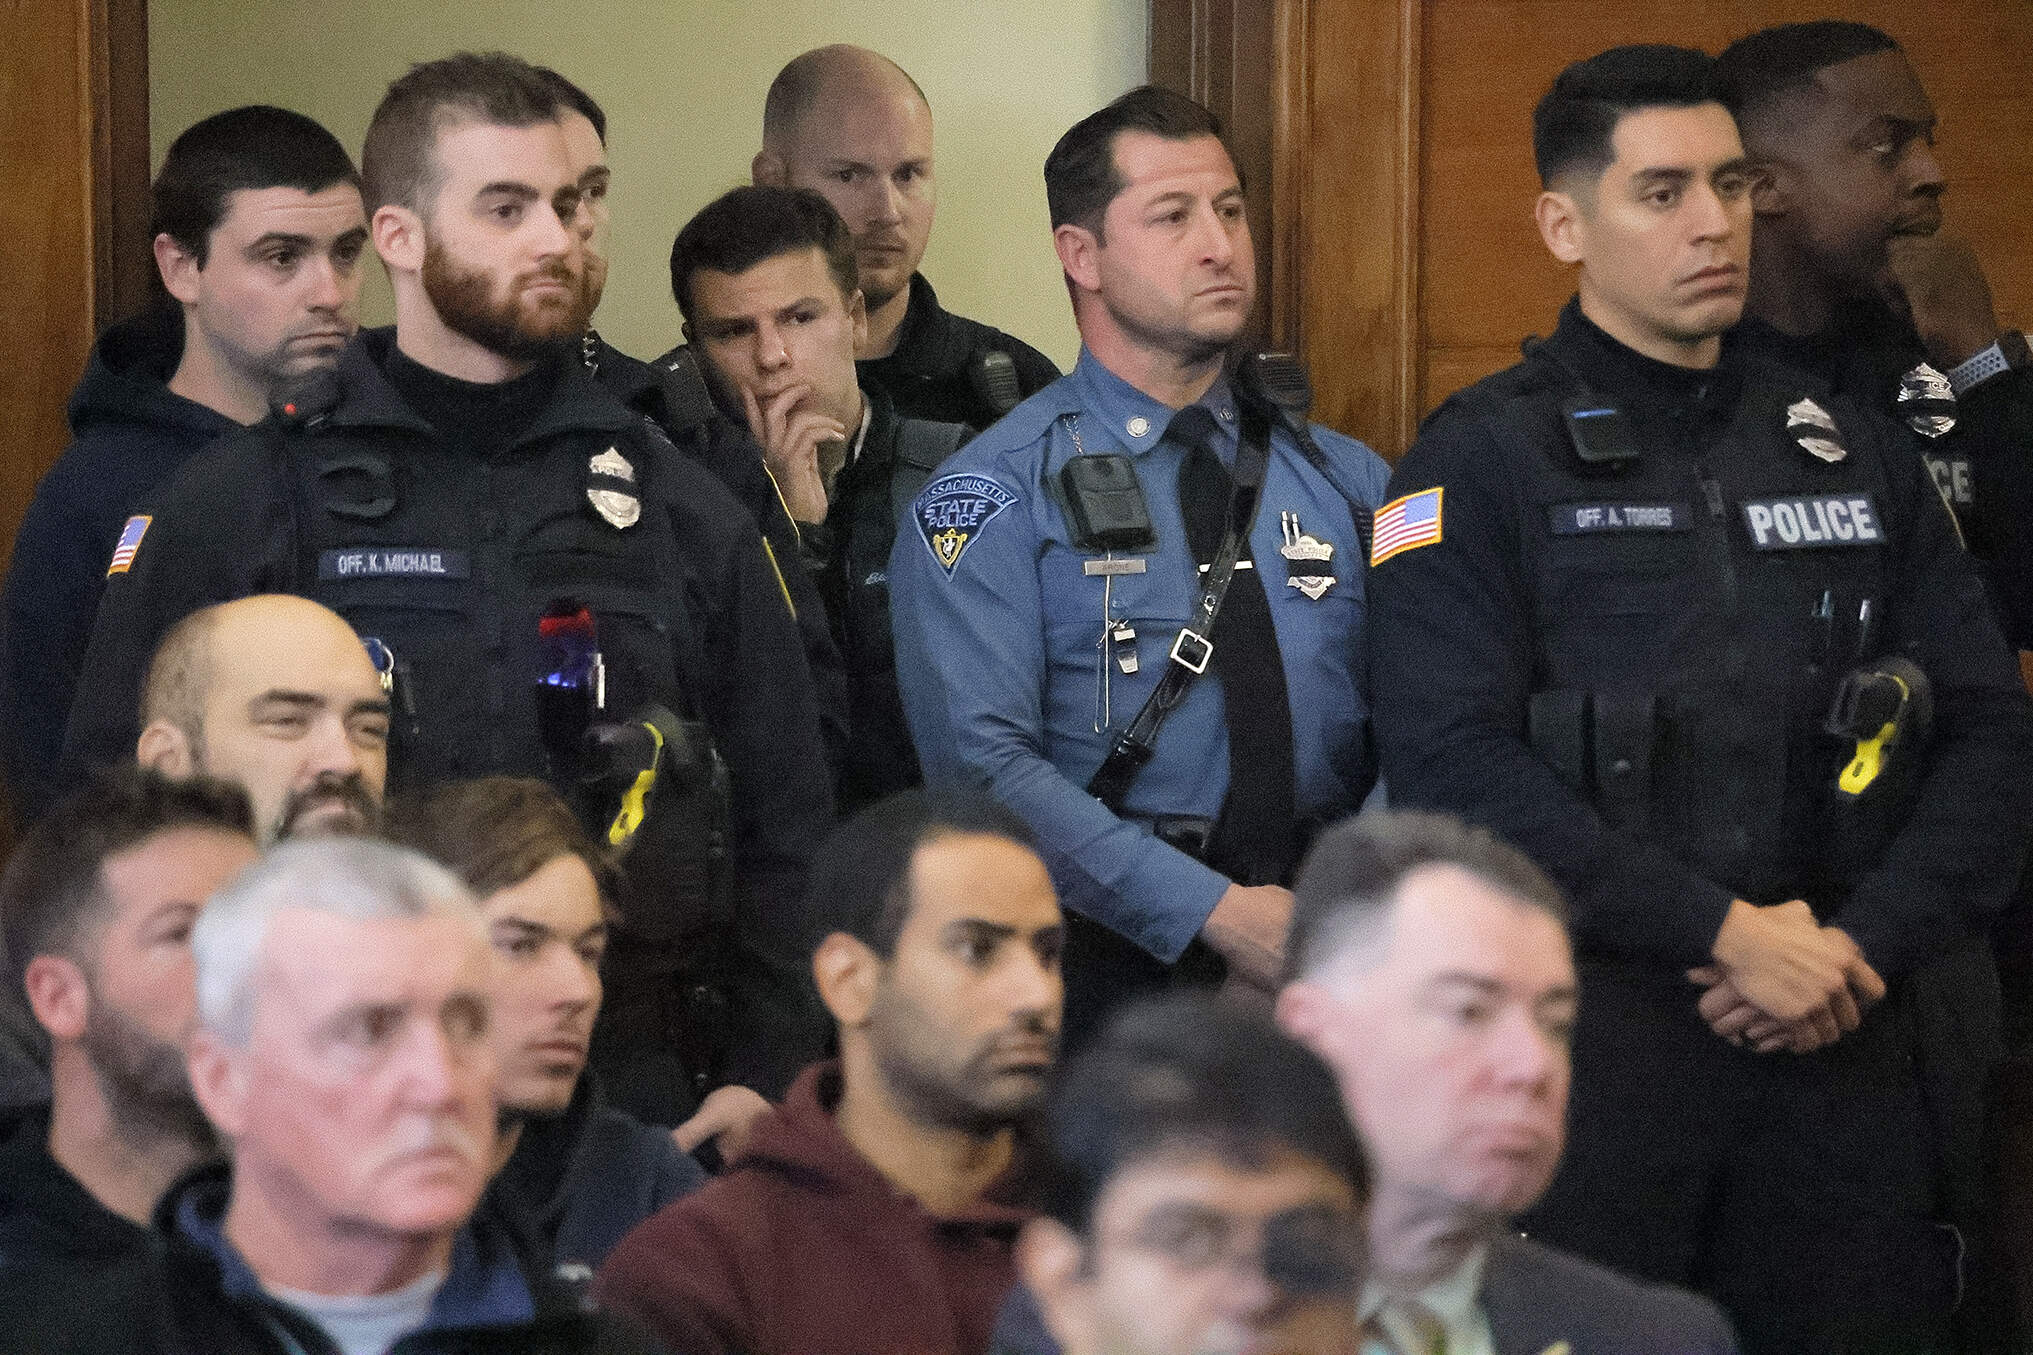 An overflow crowd of families, police, and utility workers fill the court in Waltham on Thursday as Peter Simon was arraigned on a litany of charges including manslaughter. (Lane Turner/The Boston Globe via AP, Pool)